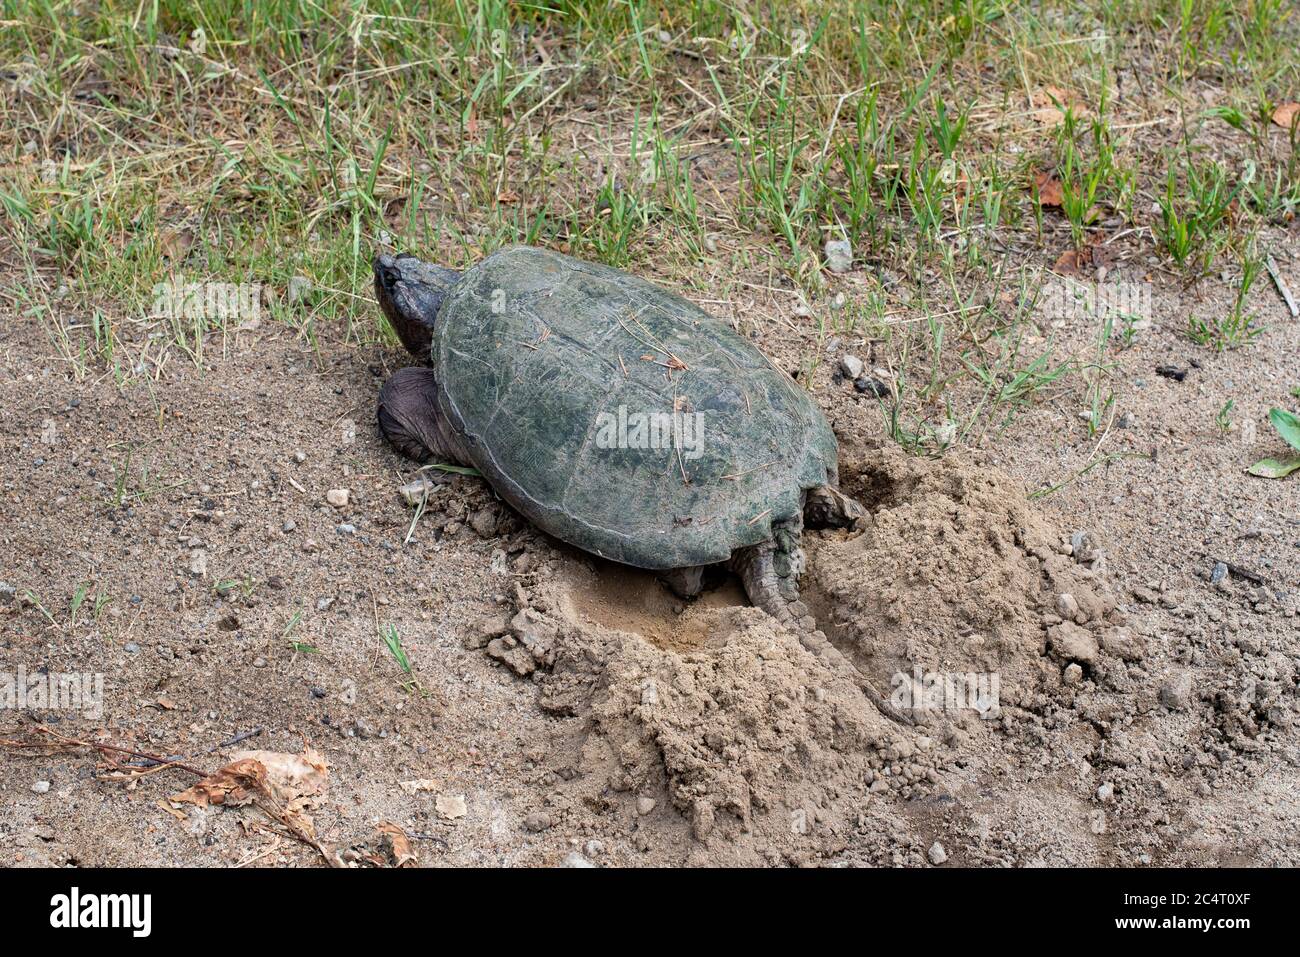 A common snapping turtle, Chelydra serpentina, digging a hole in loose sandy soil to lay her eggs. Stock Photo